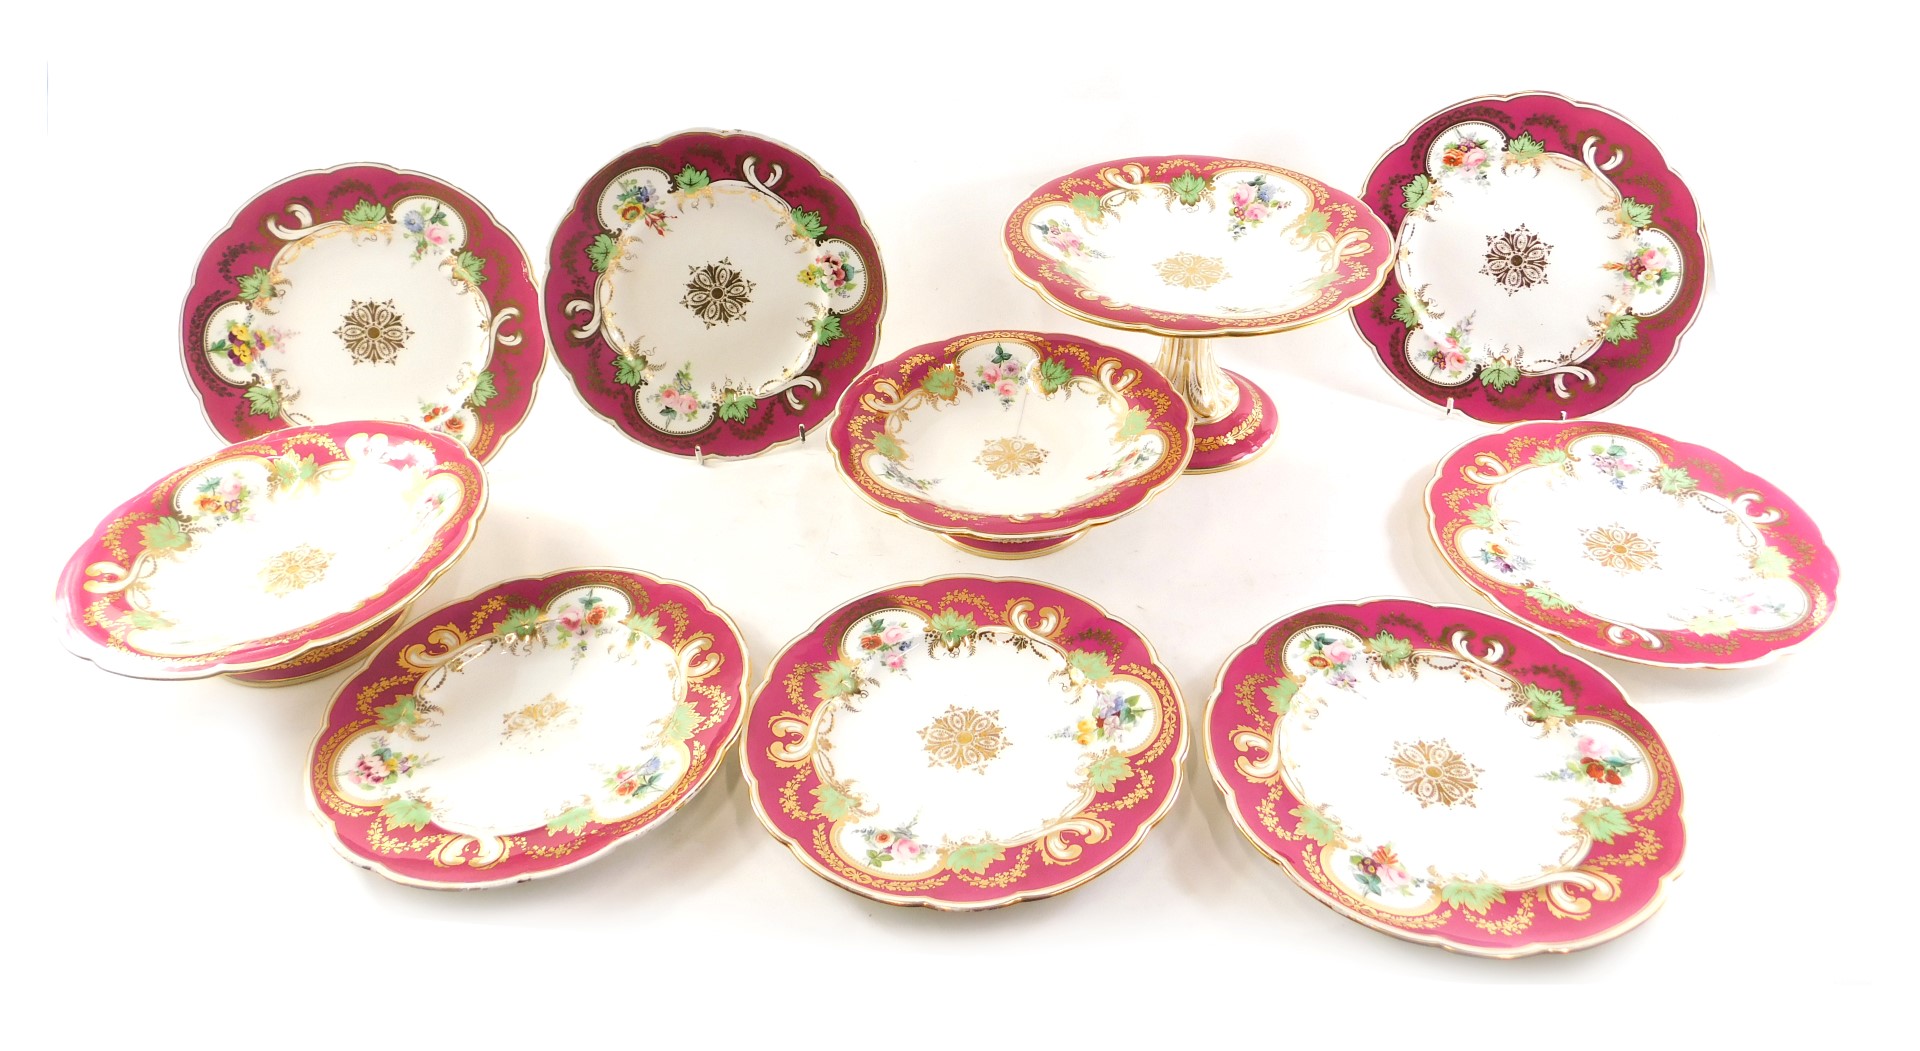 A 19thC porcelain dessert service, with puce border, painted with flower sprays, picked out in gilt,